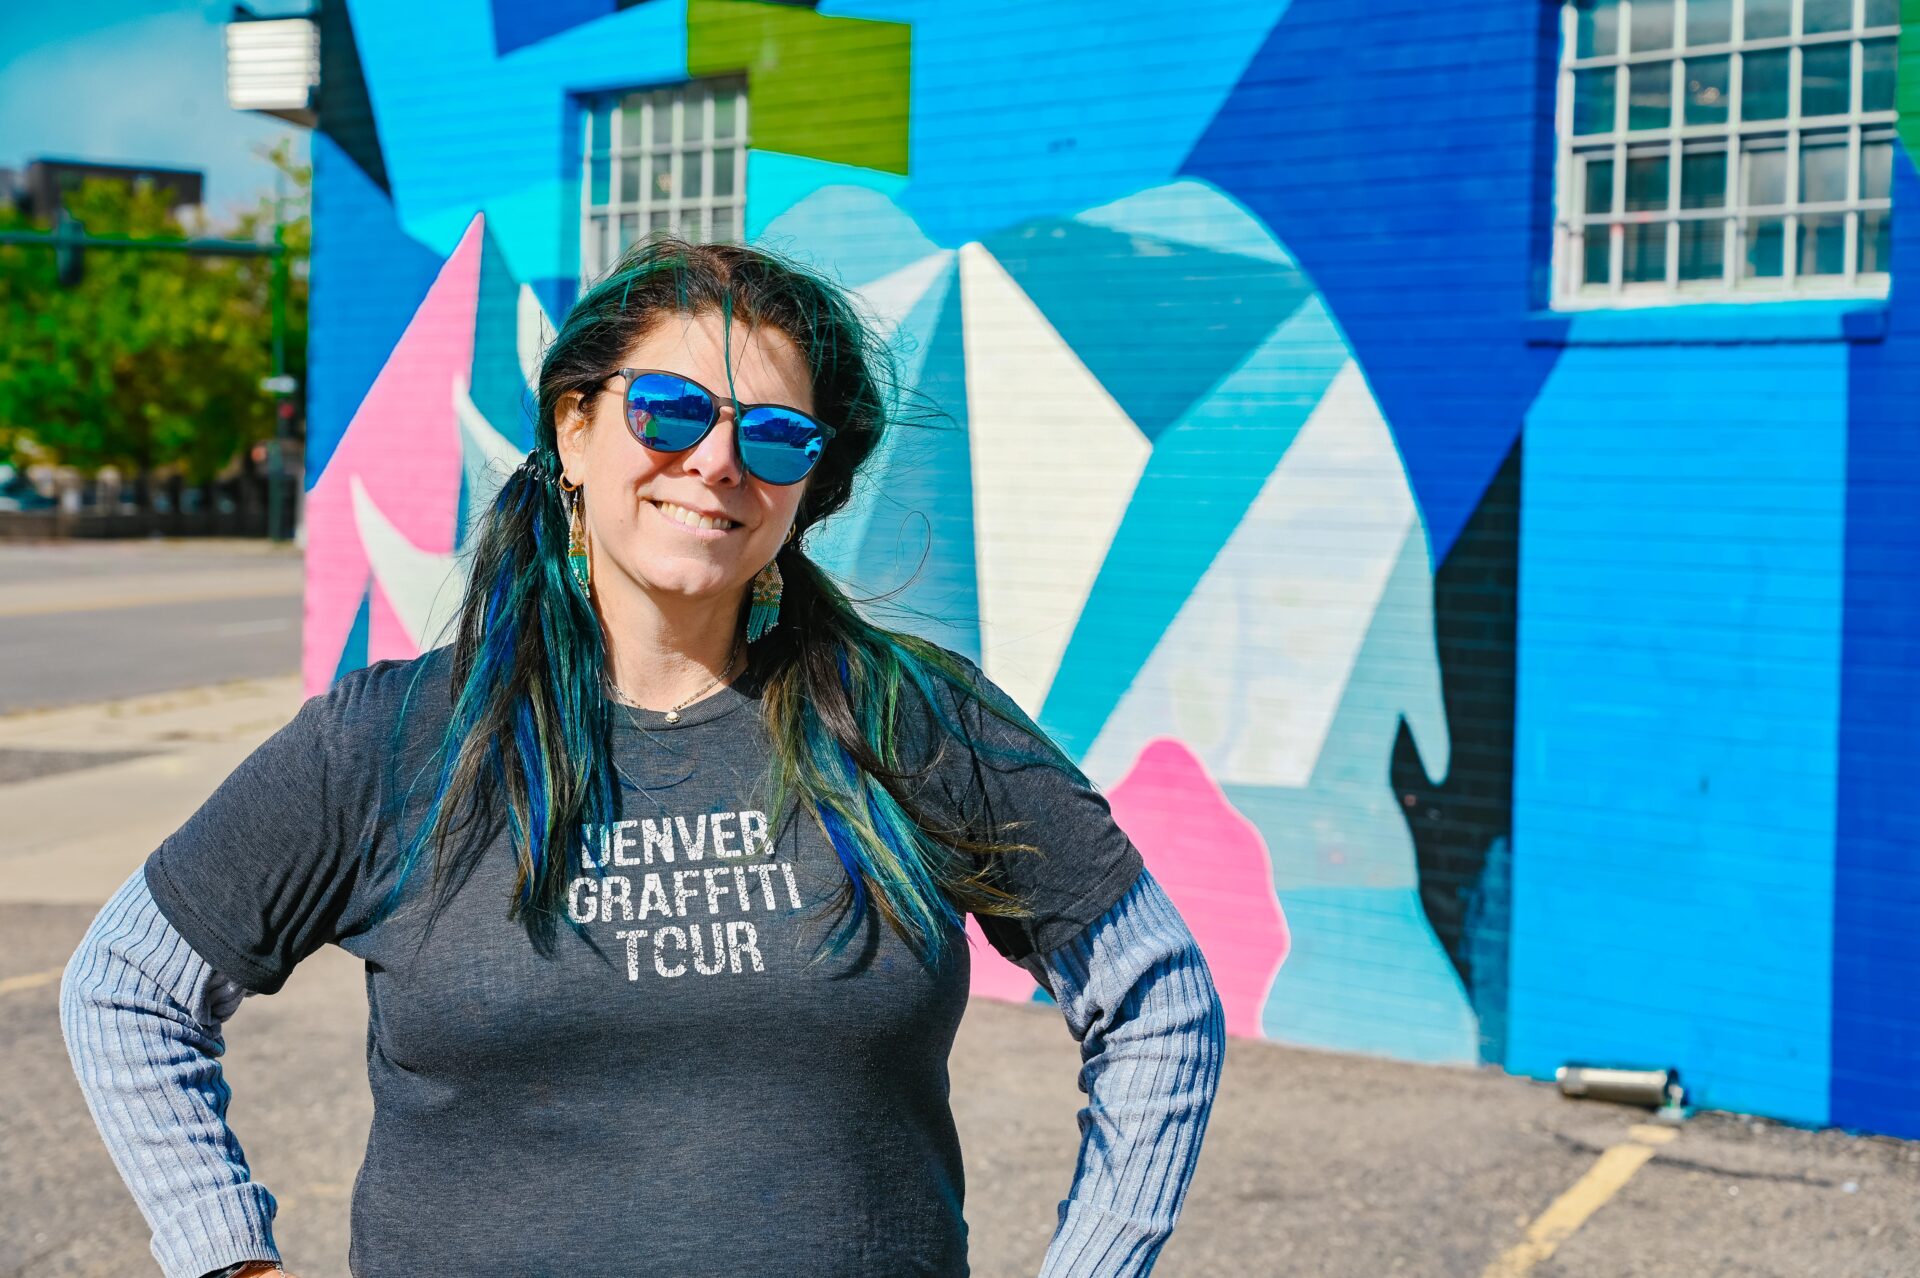 jana, the co-owner of denver graffiti tour, stands in front of a brightly colored mural